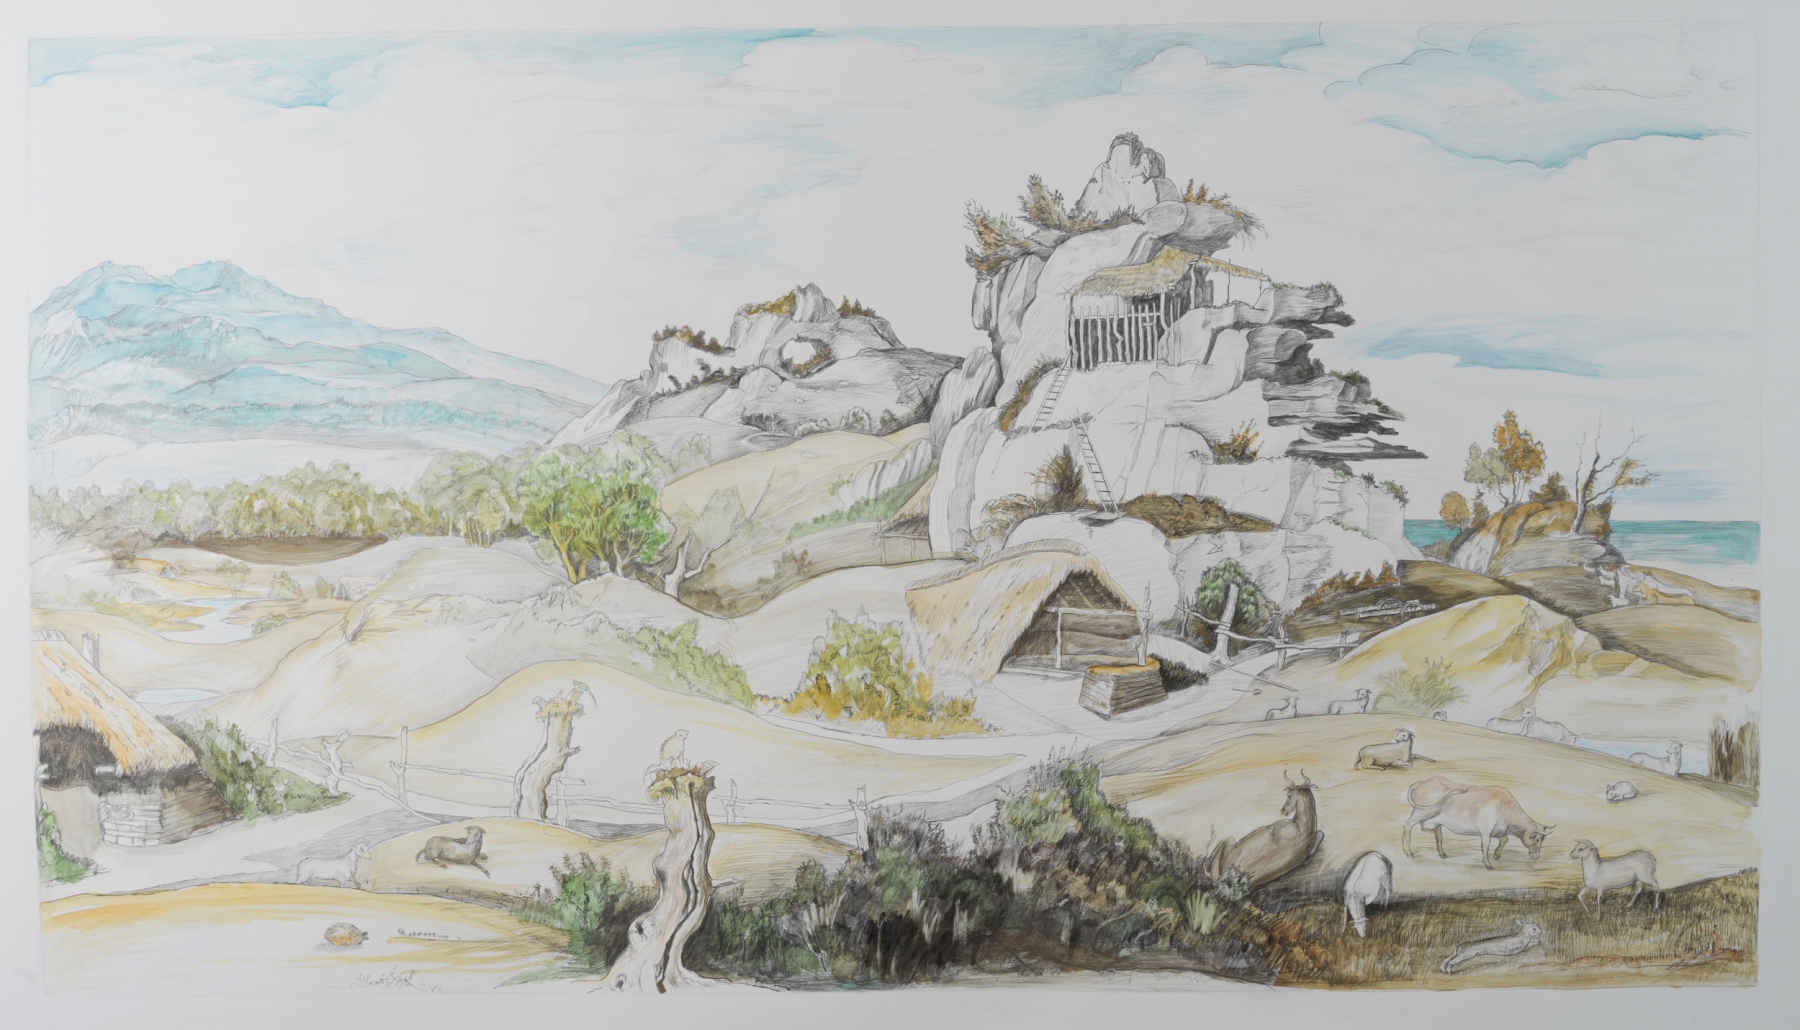 Ken Gonzales-Day

Untitled (After Jan Jansz, Landscape with an Episode from the Conquest of America, c.1535), 2021

Color pencil and archival ink on rag paper

33.5 x 60 in